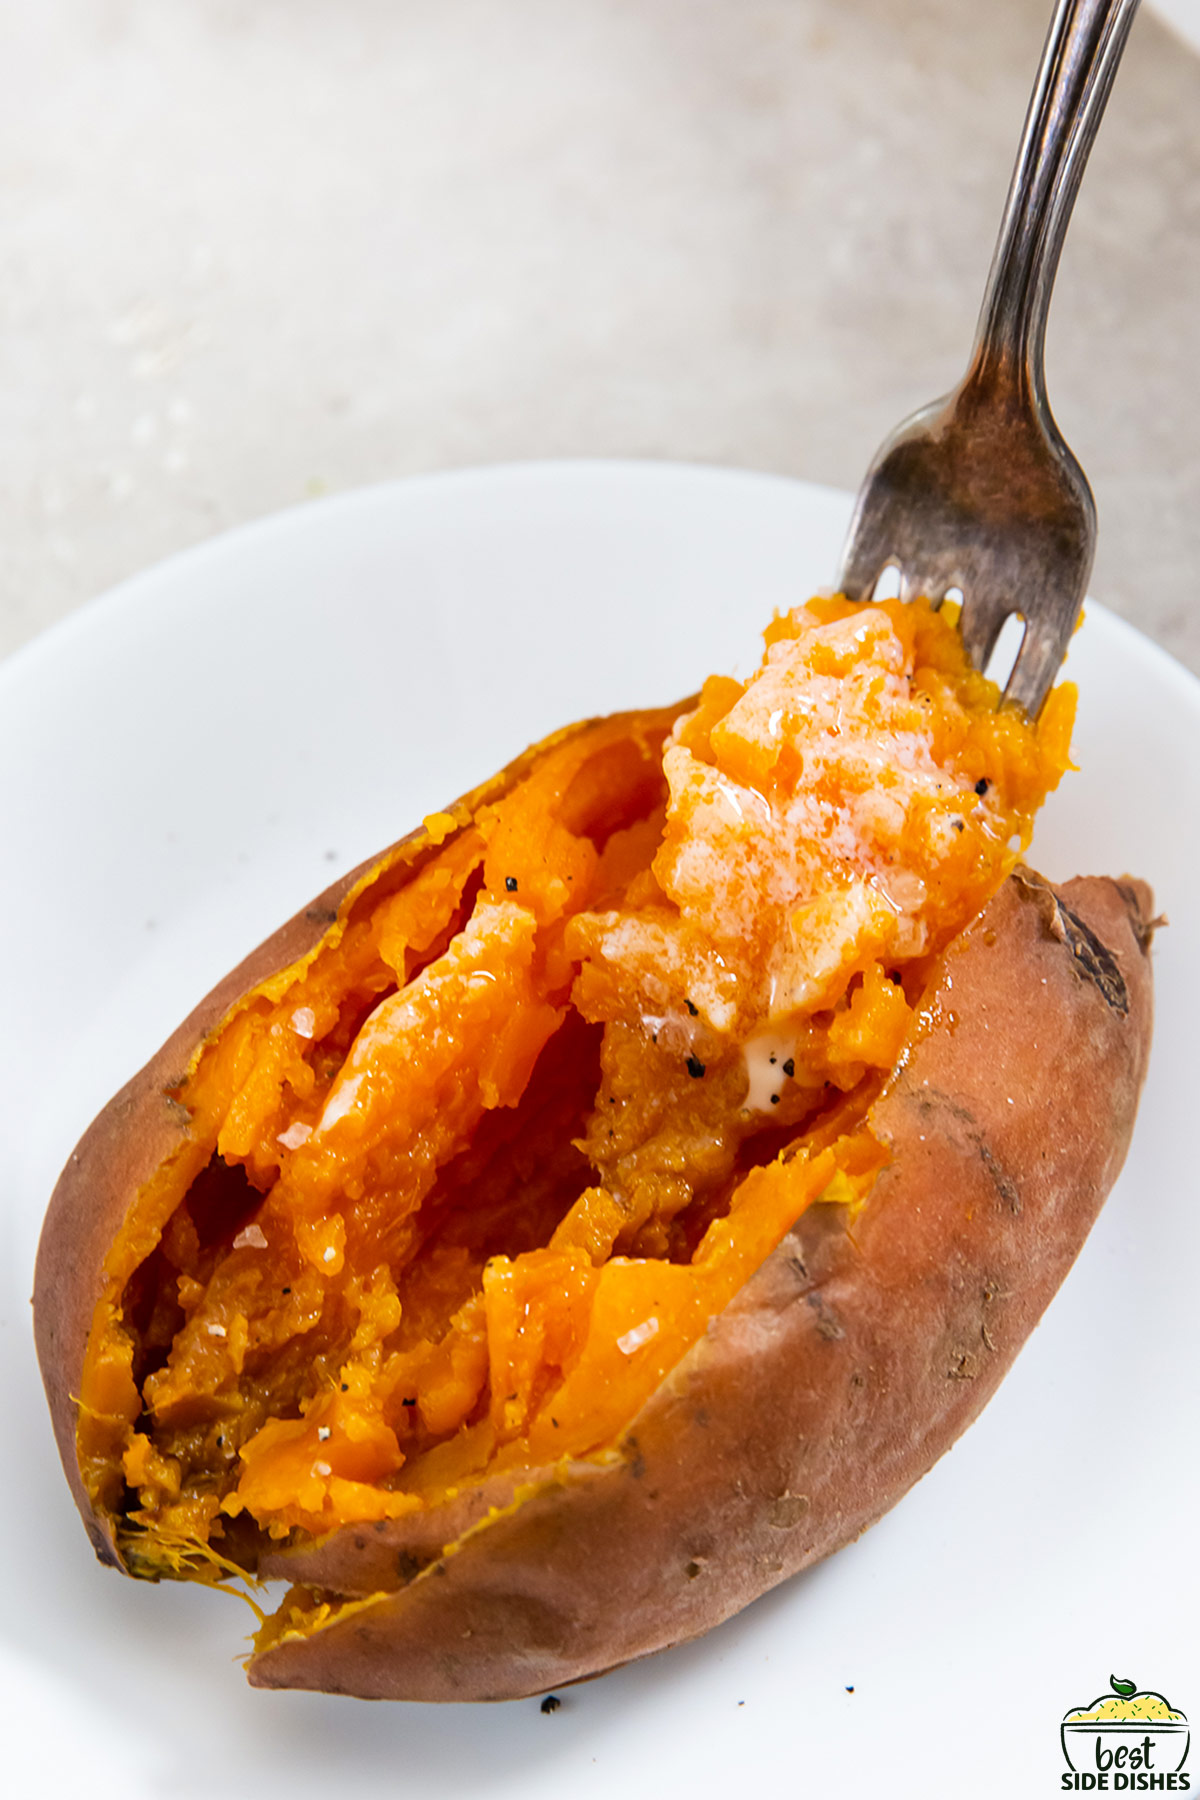 a cooked sweet potato on a white plate with a fork full of sweet potato stuck into it